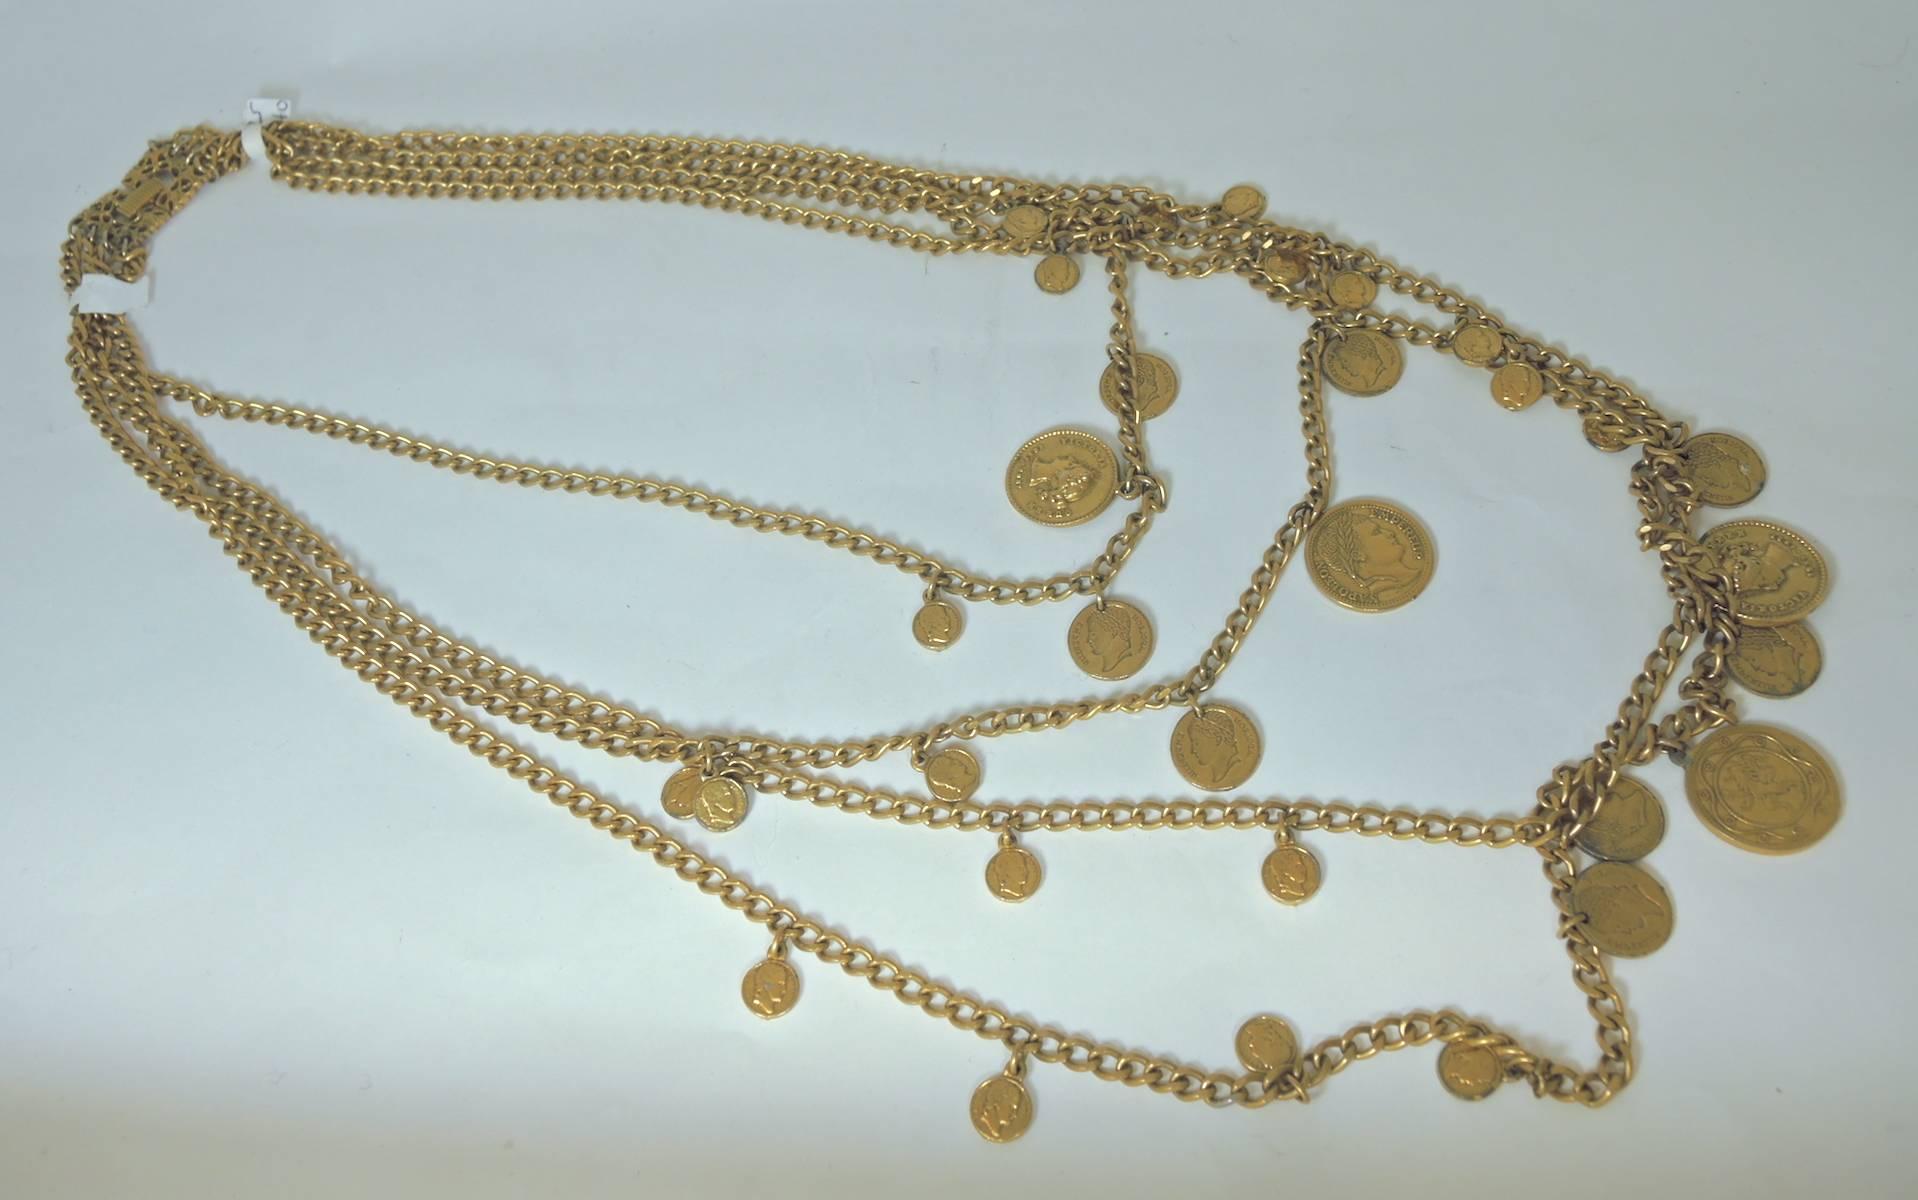 This Gorgeous vintage Goldette coin necklace features four chains designed with Victorian era coins. The measurements from longest to shortest chains are as follows: the longest measures 36” x 1/4”. The second measures 32” x 1/4”.The third measures